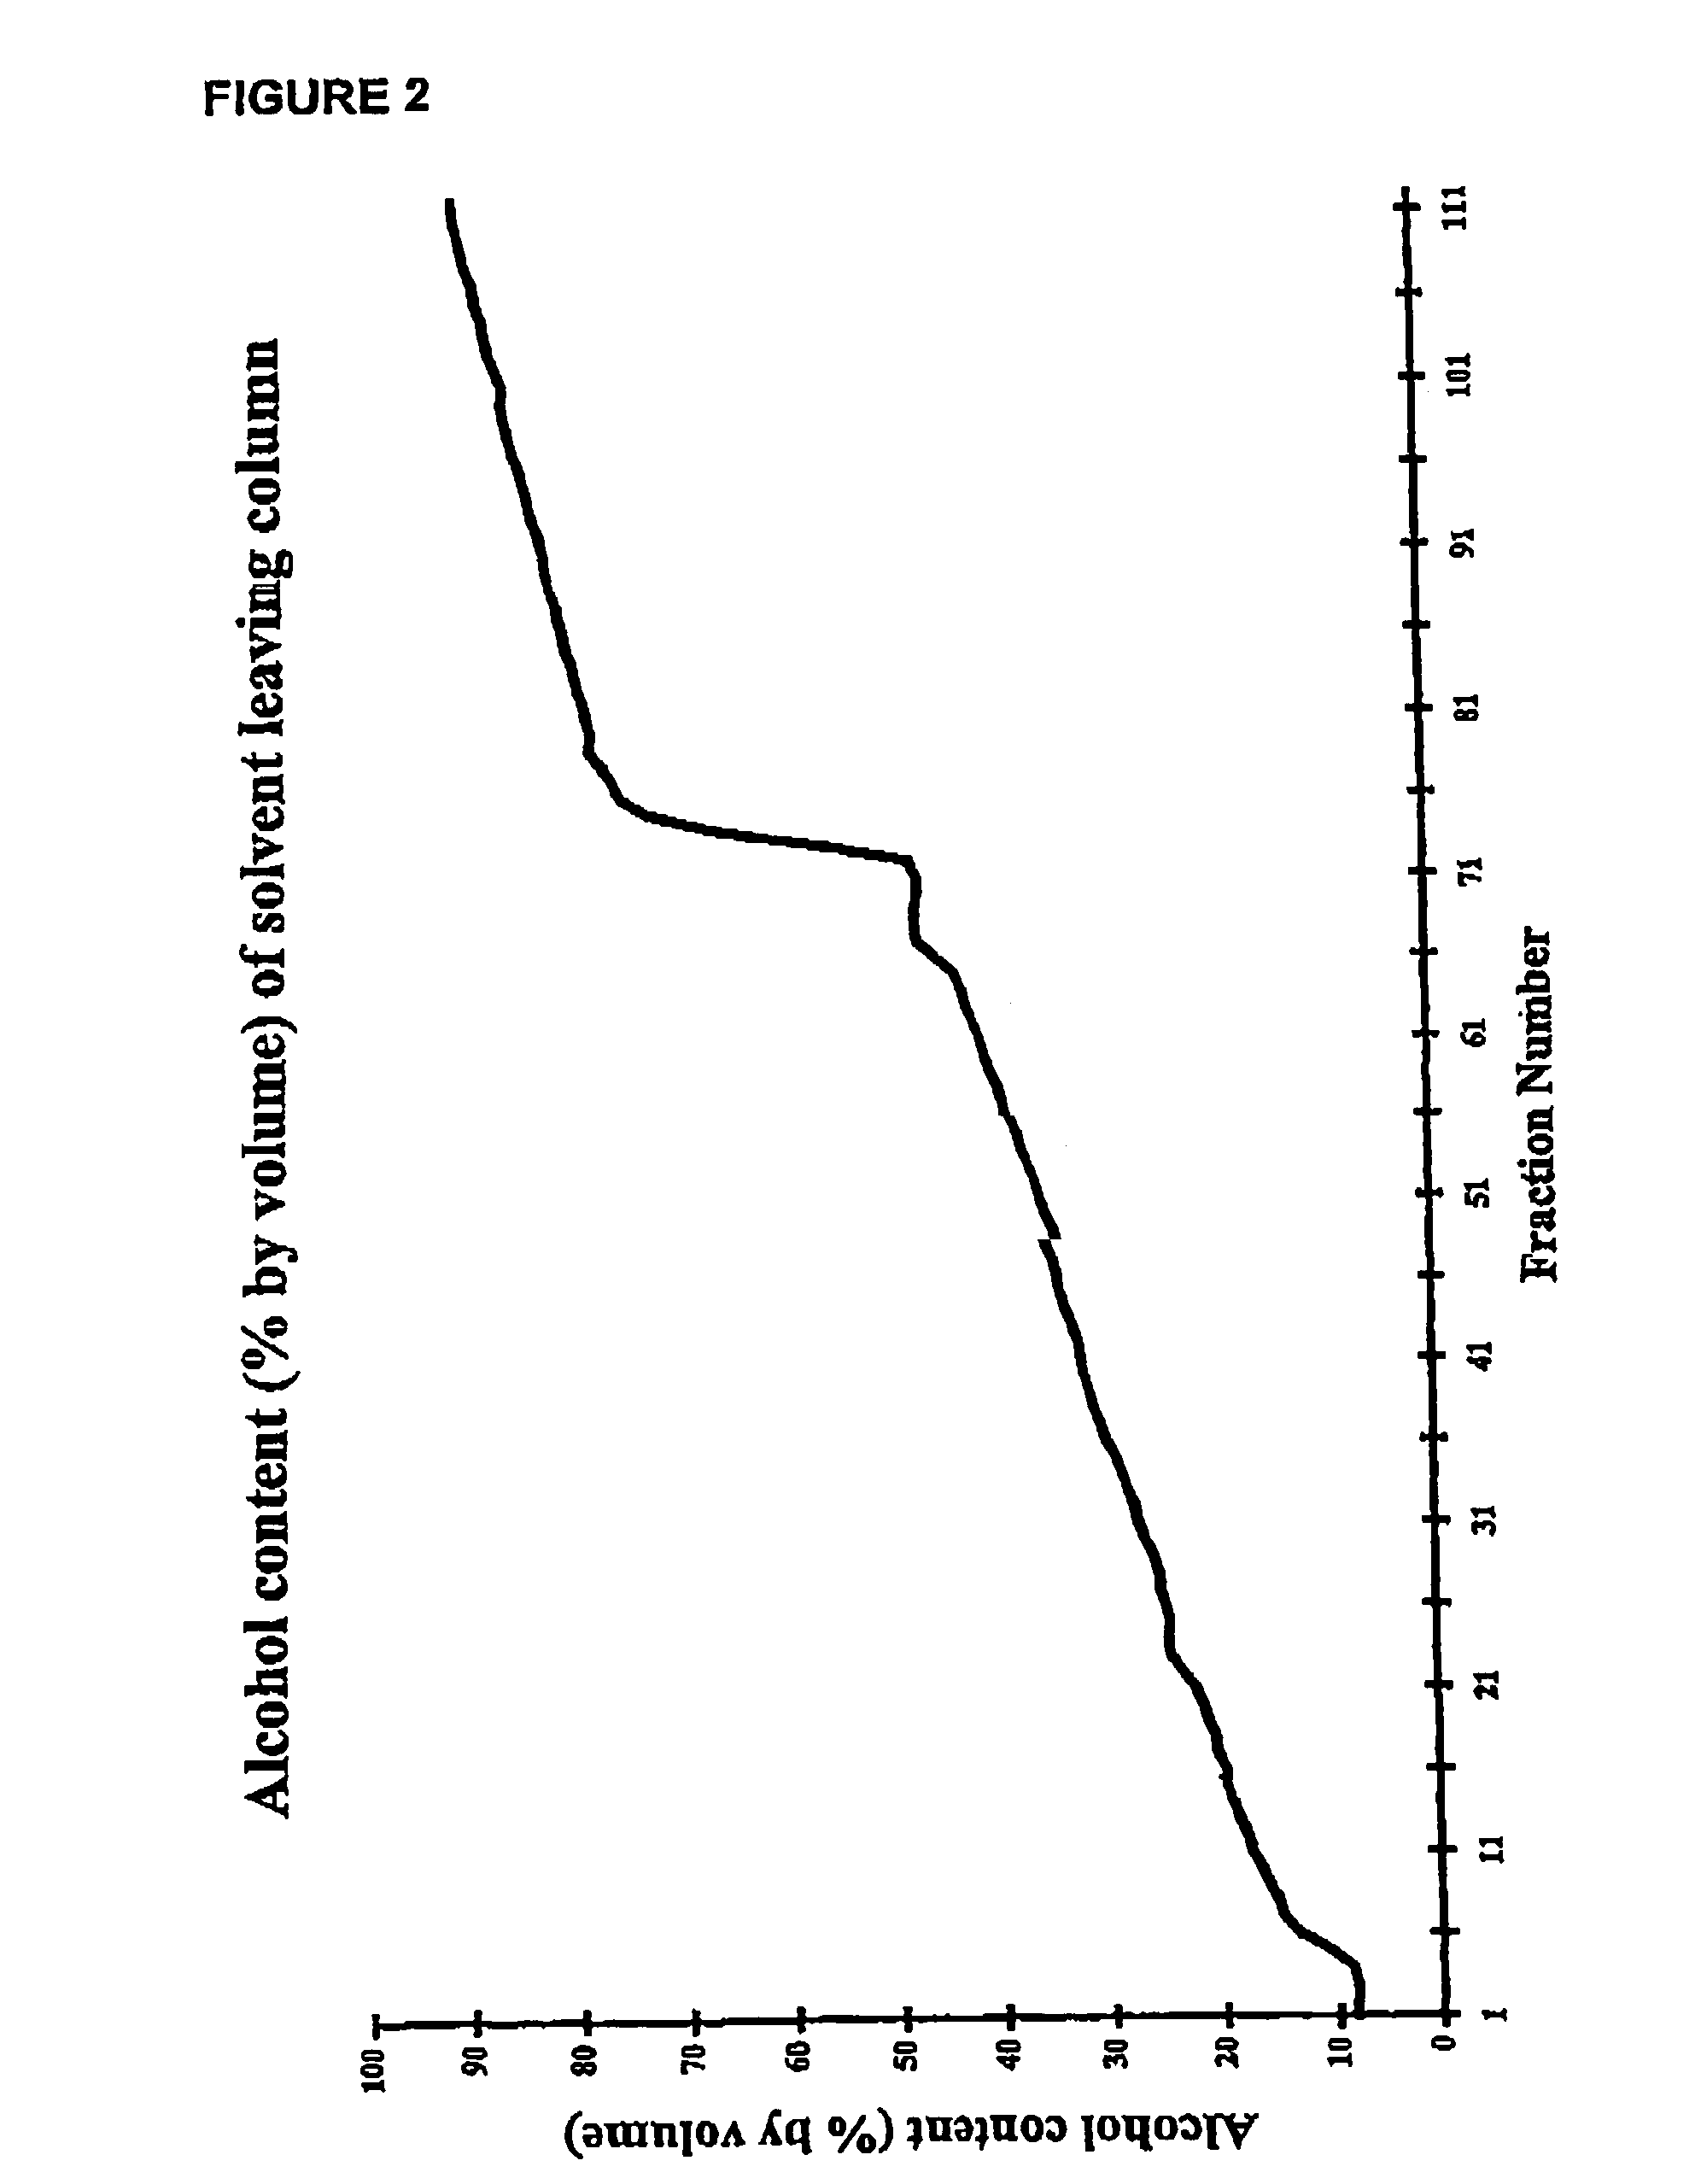 Process for selectivity extracting bioactive components